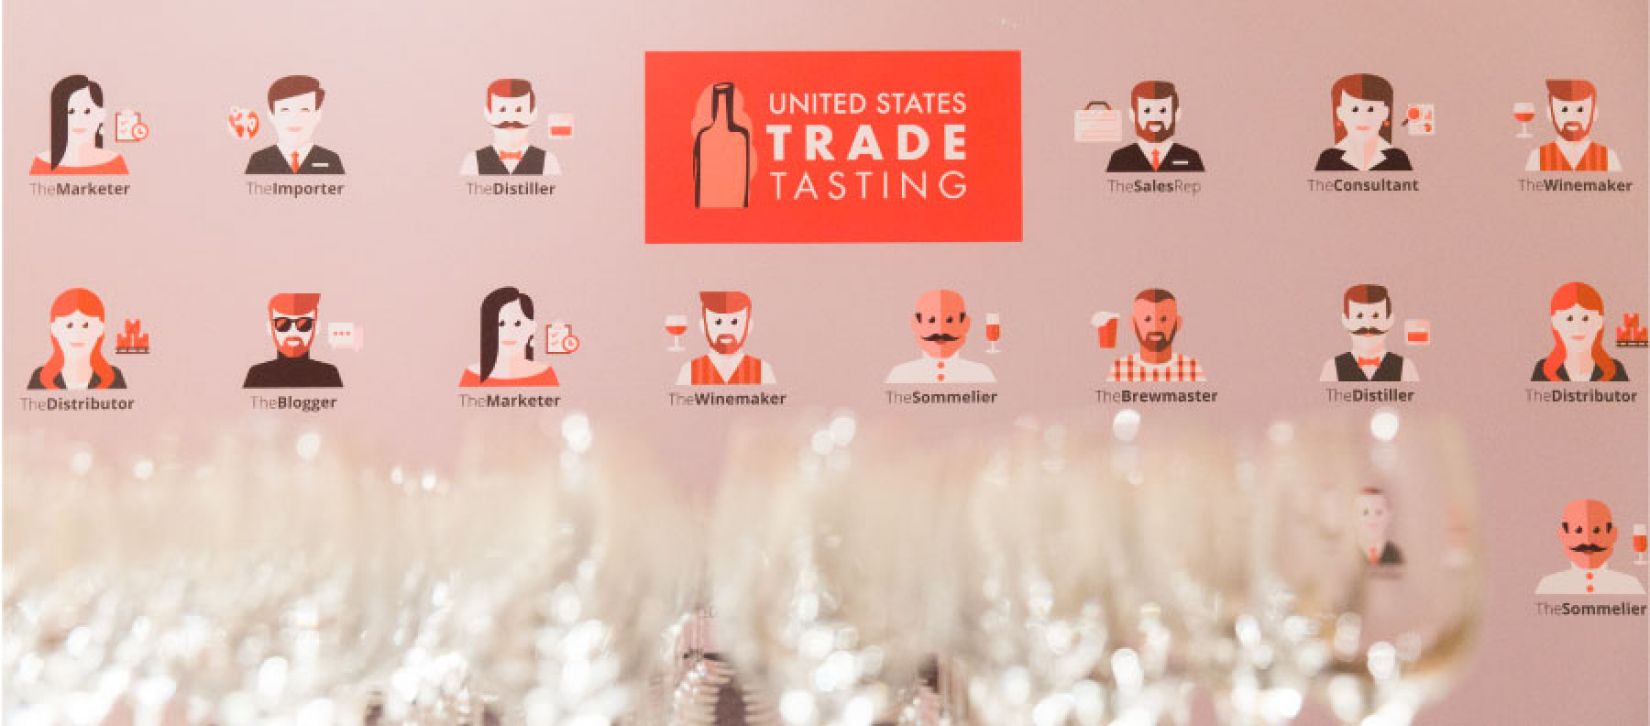 Photo for: 2022 USA Trade Tasting Brands Registrations Now Open